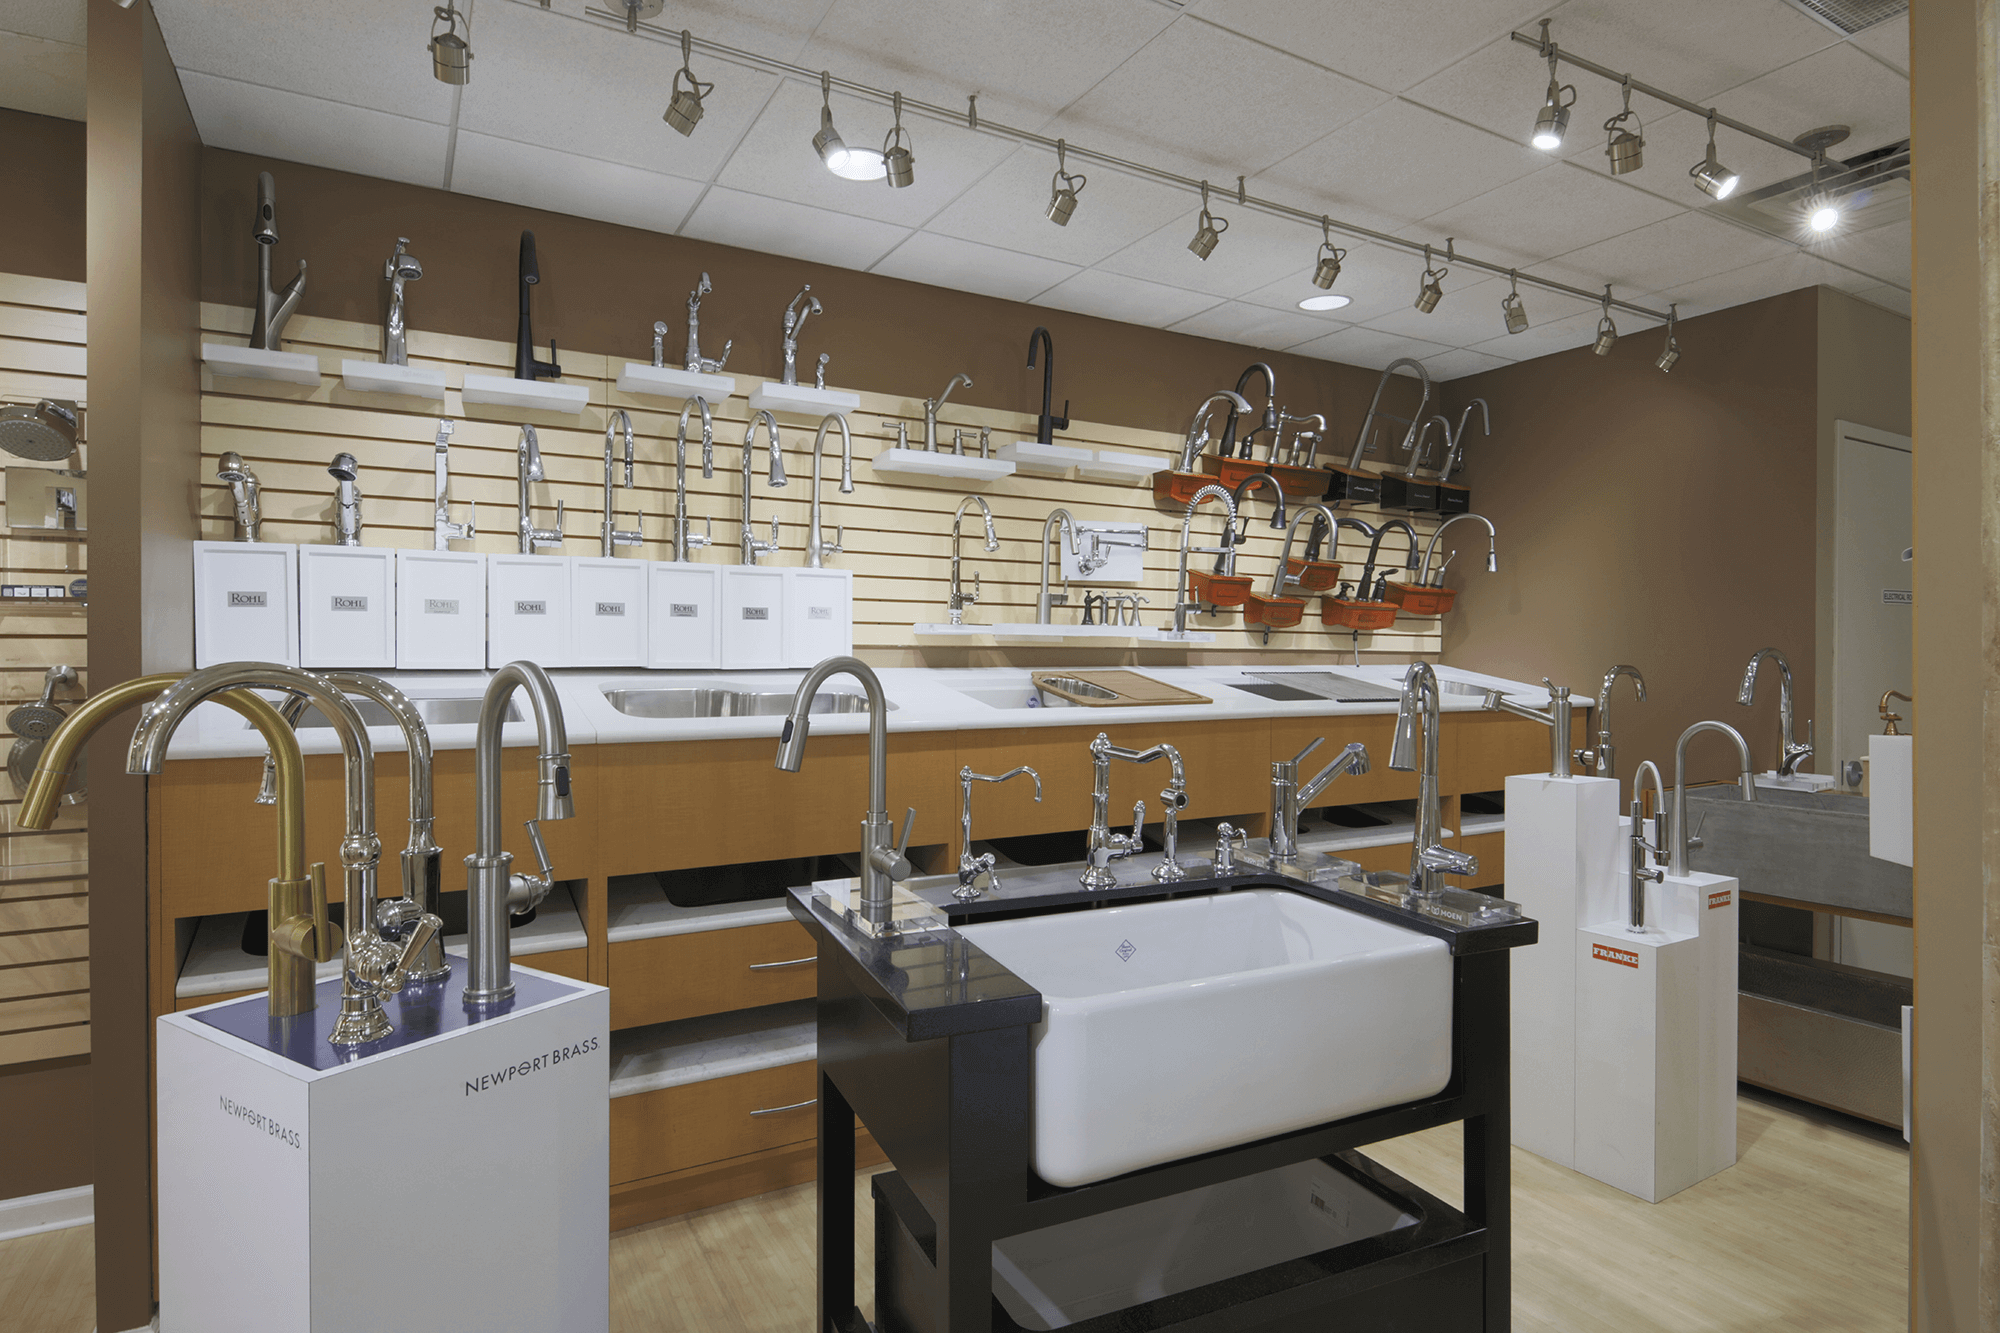 kitchen showroom featuring several silver-colored metal faucets on standalone sinks